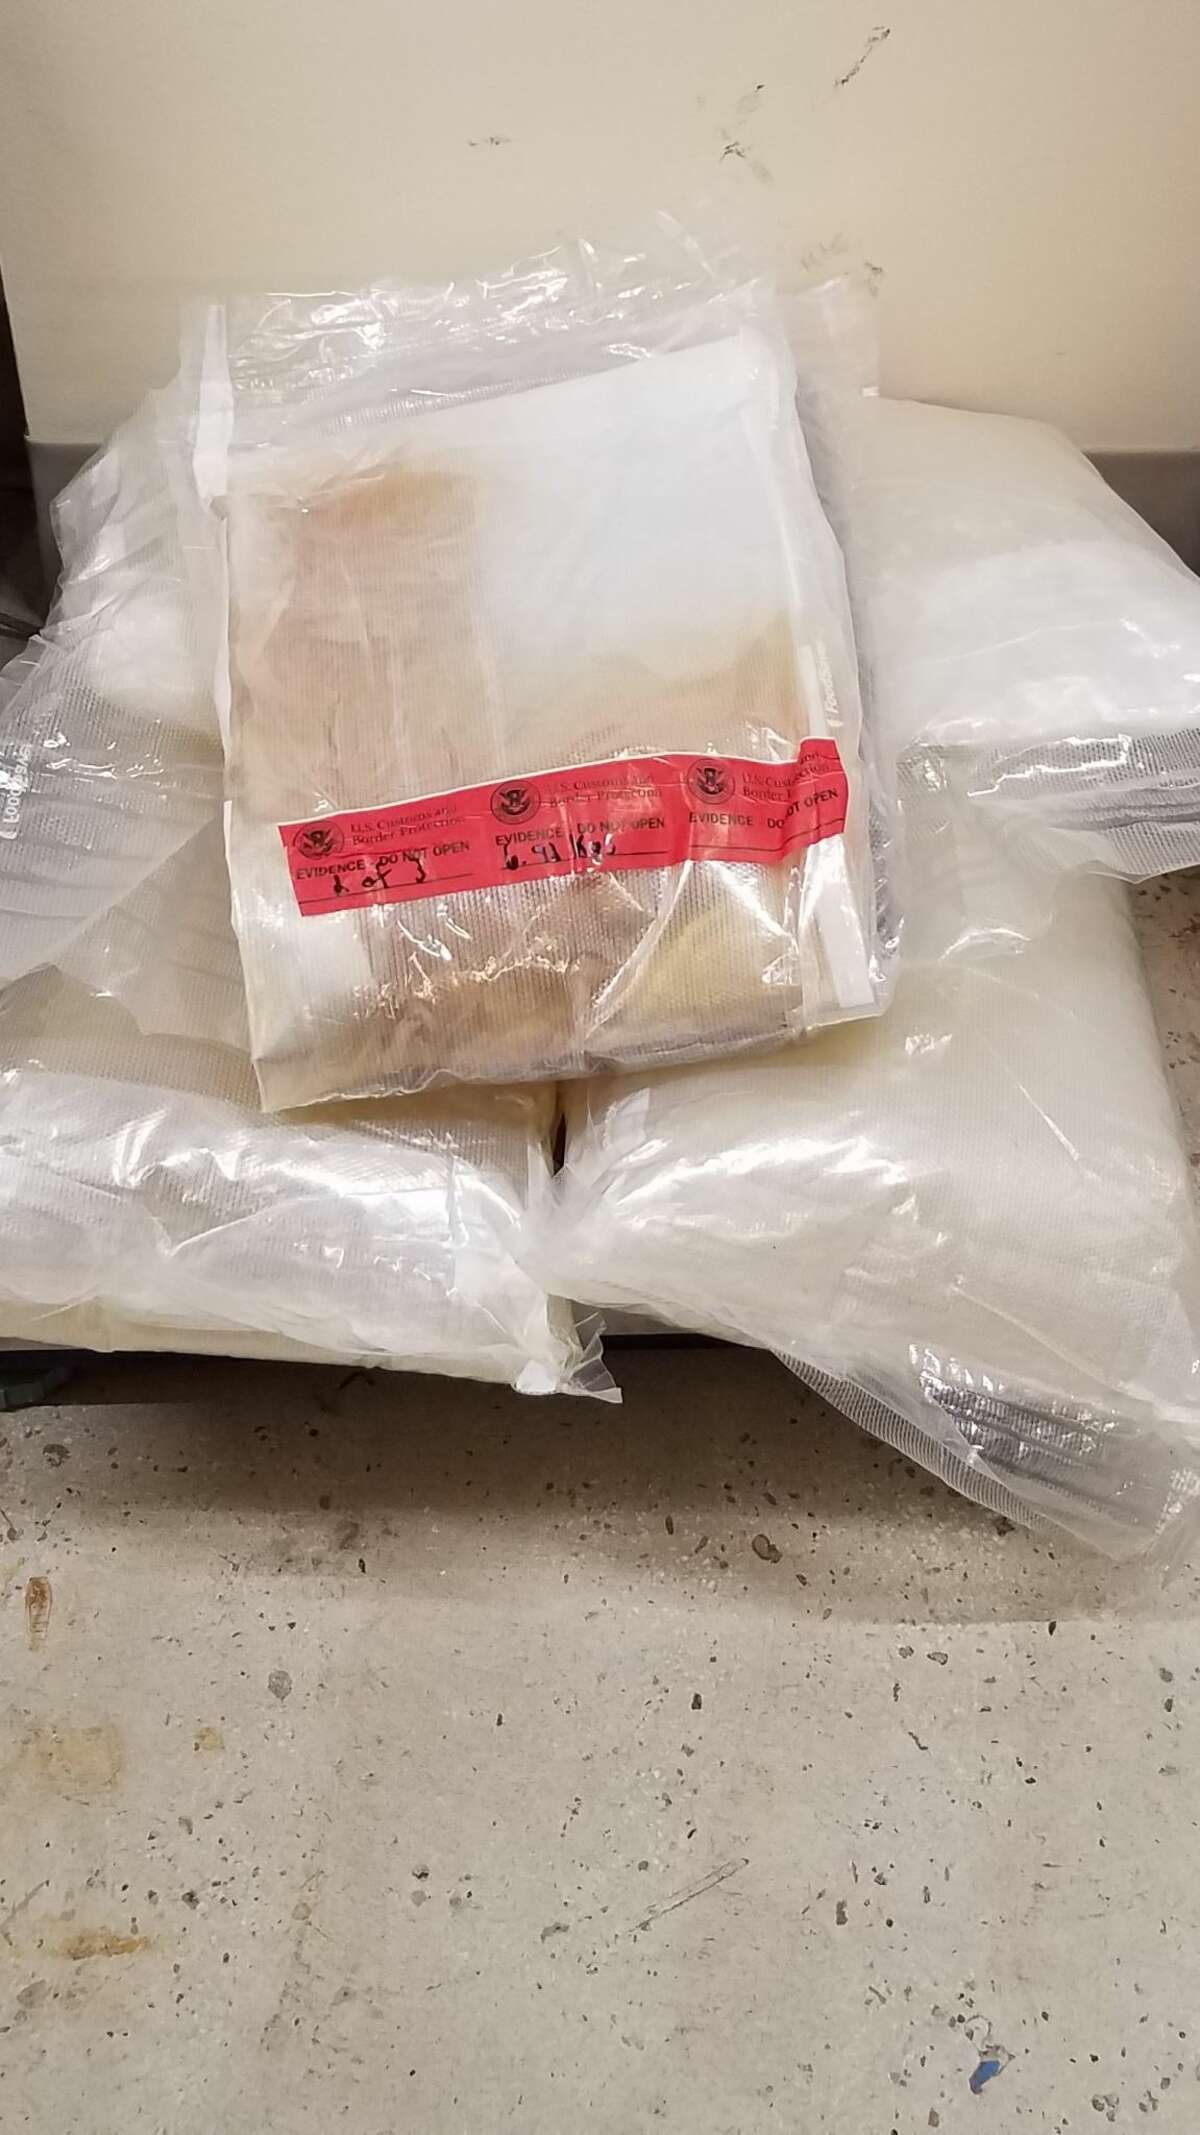 19 packages containing a total of 23 pounds of alleged meth were seized at the Juarez-Lincoln International Bridge.